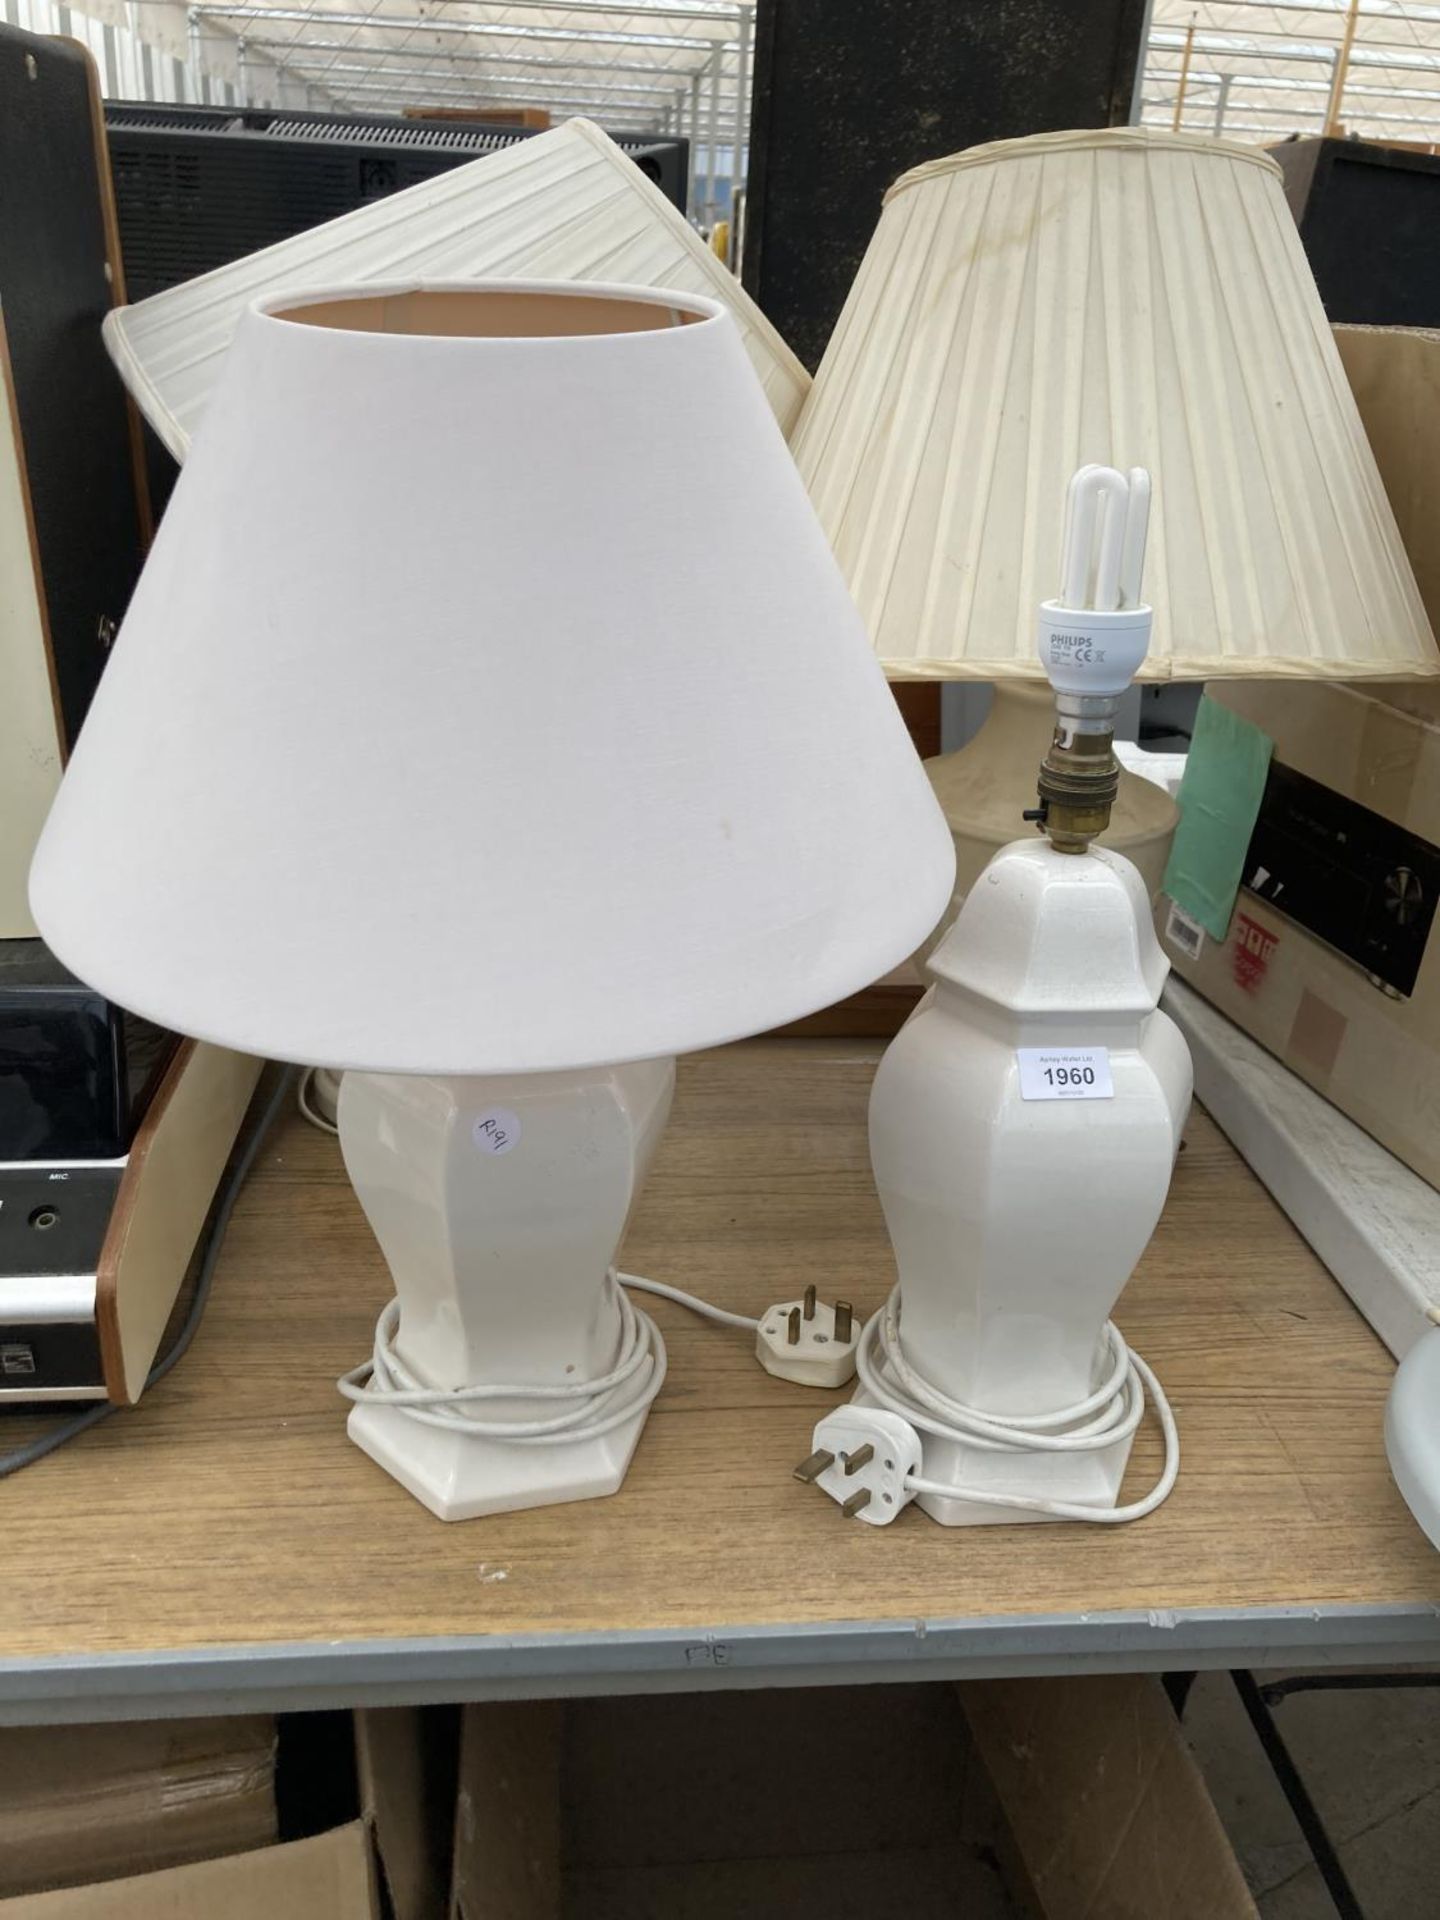 TWO PAIRS OF TABLE LAMPS COMPLETE WITH SHADES